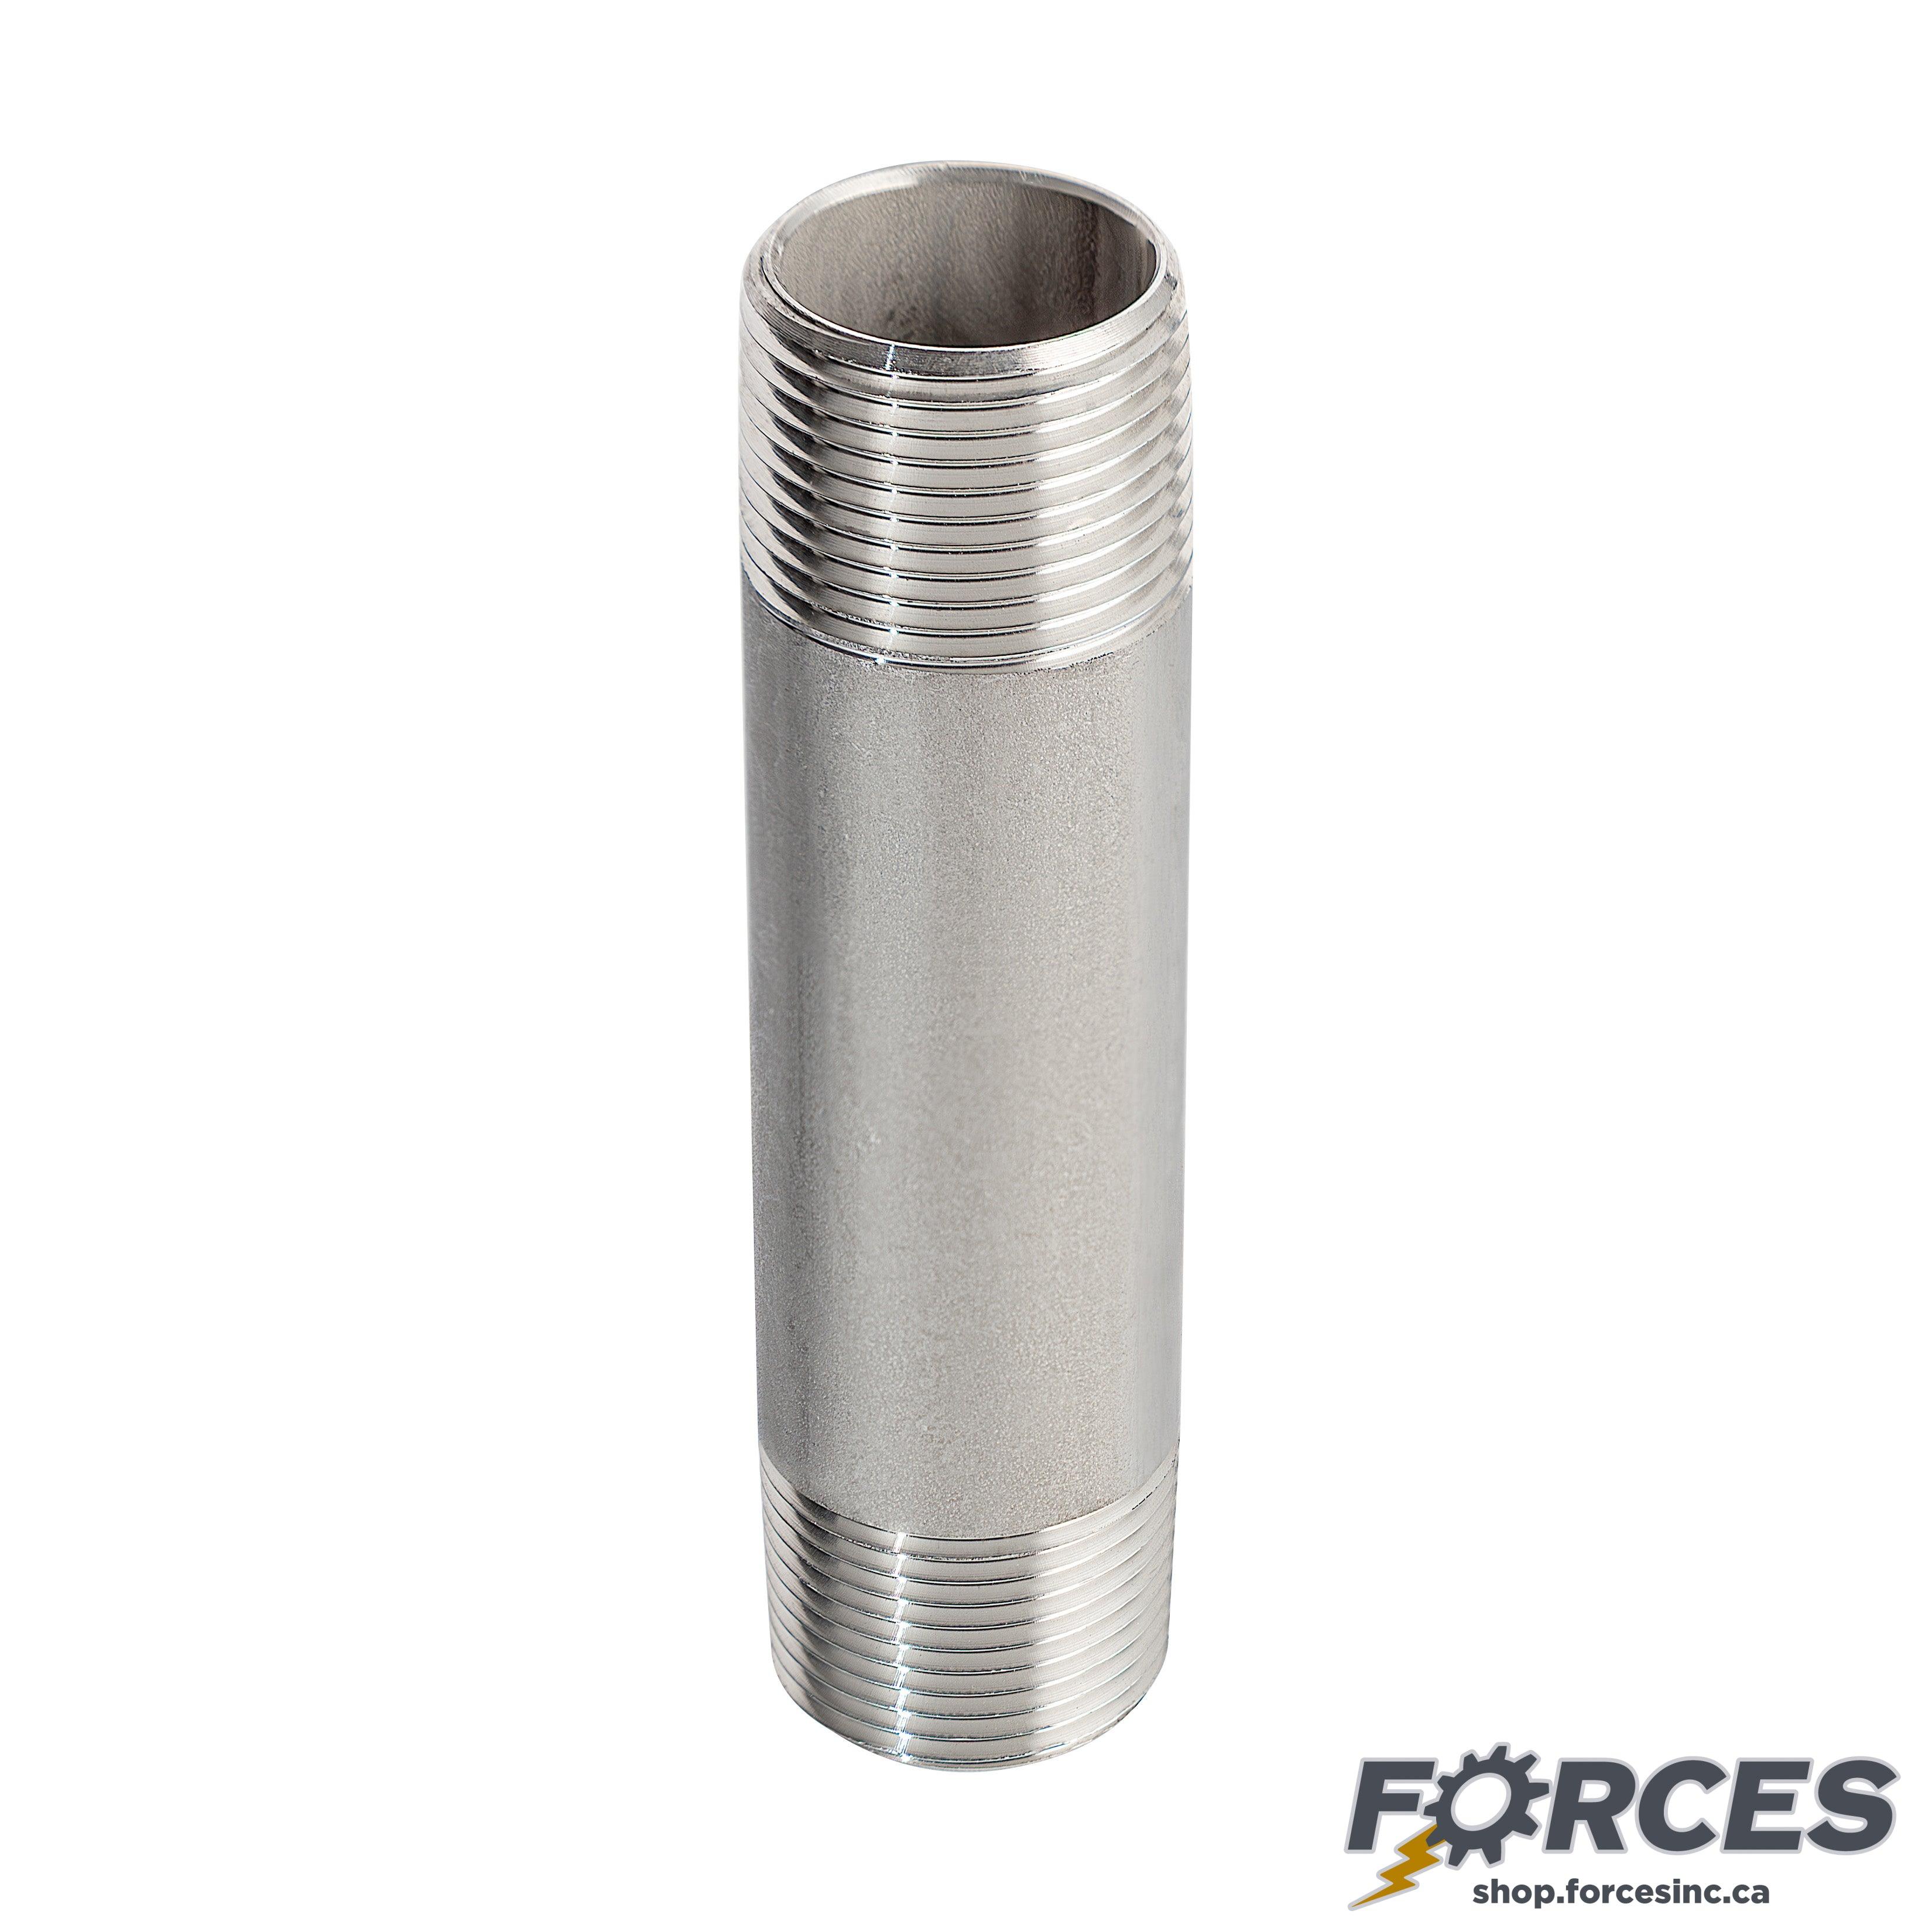 1/2" X 1-1/2" Long Nipple - Stainless Steel 316 - Forces Inc